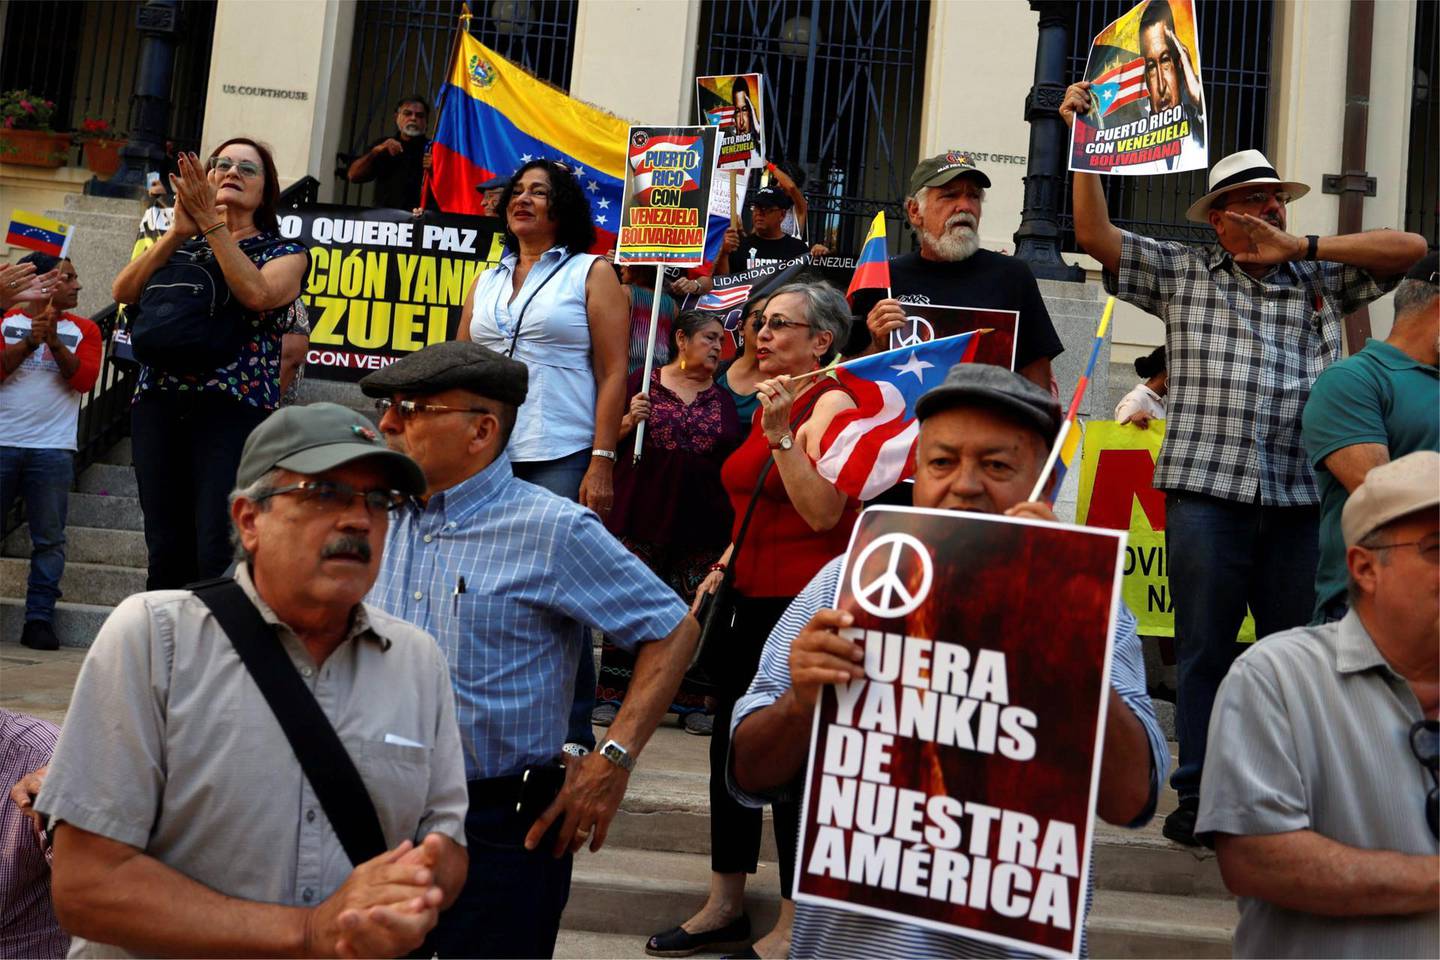 epa07371240 People hold placards and flags during a demonstration supporting the Government of Nicolas Maduro, in front of the Federal Court of Old San Juan, Puerto Rico, 14 February 2019. The demonstration also expressed their disproval of a US military intervention in the South American country.  EPA/THAIS LLORCA